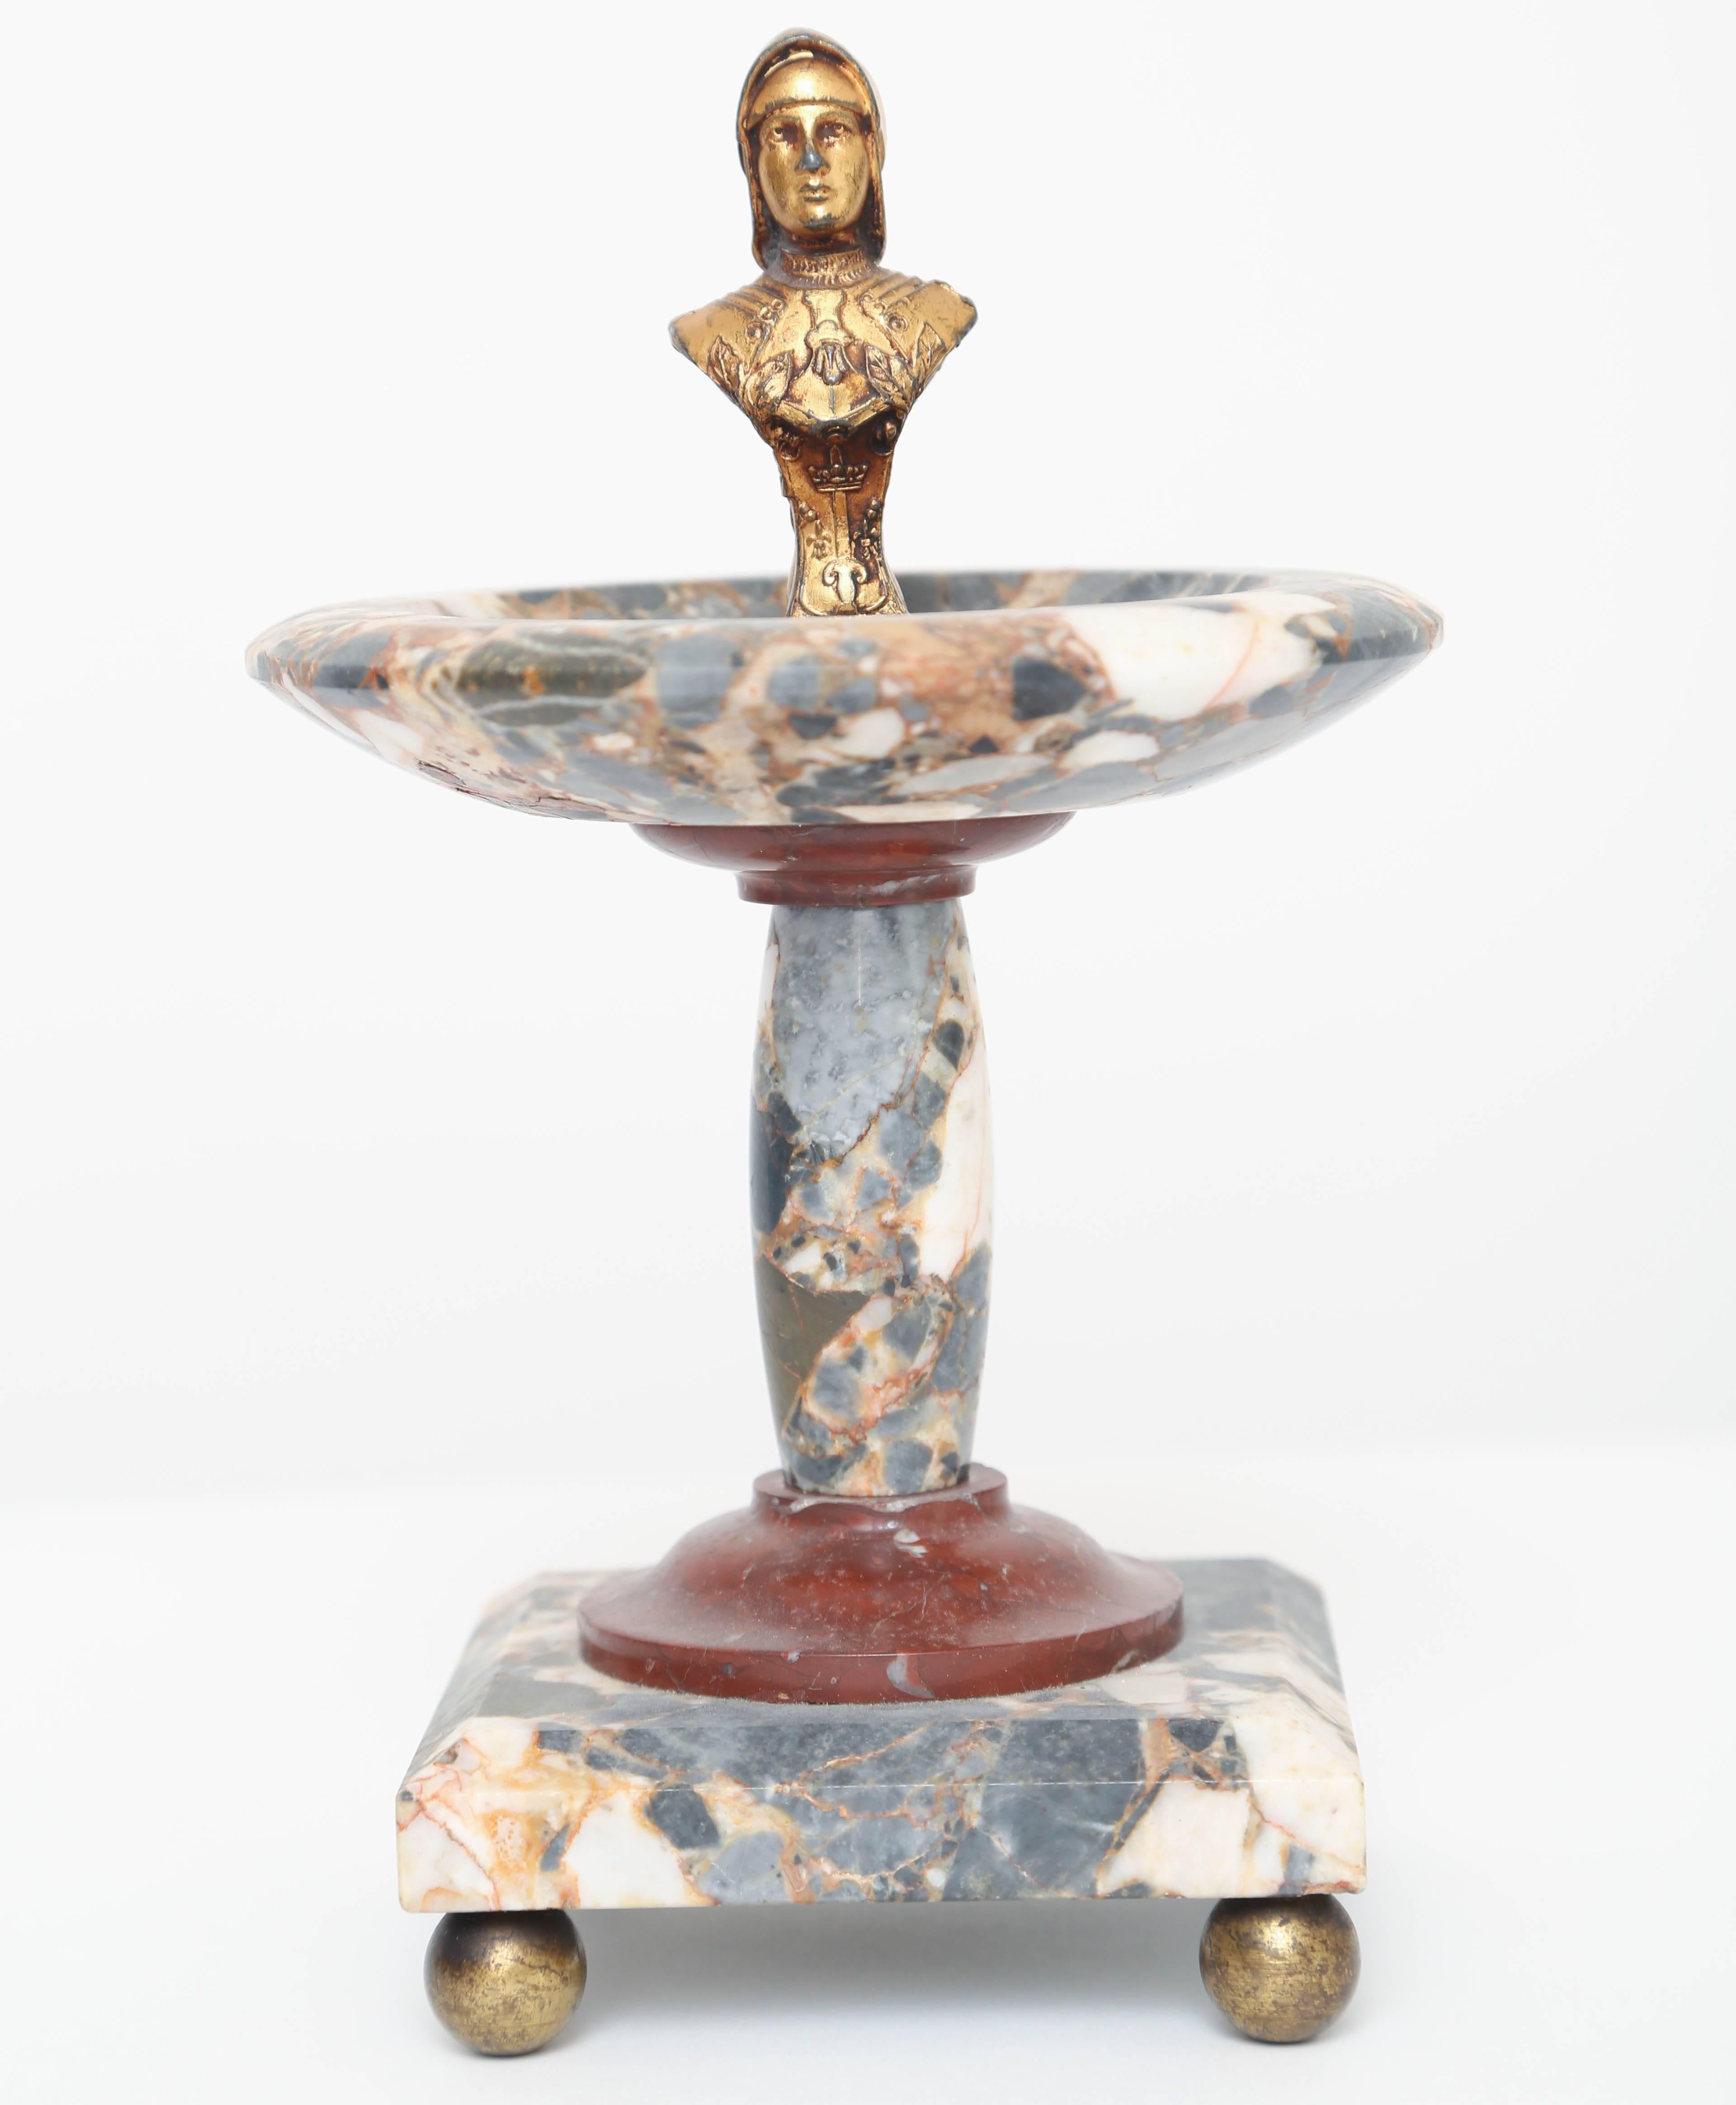 Turned breccia and antico rosso marble tazza on column supported by gilt bronze ball feet. The top is fitted with a finial gilt bronze bust of the French heroine Joan of Arc.